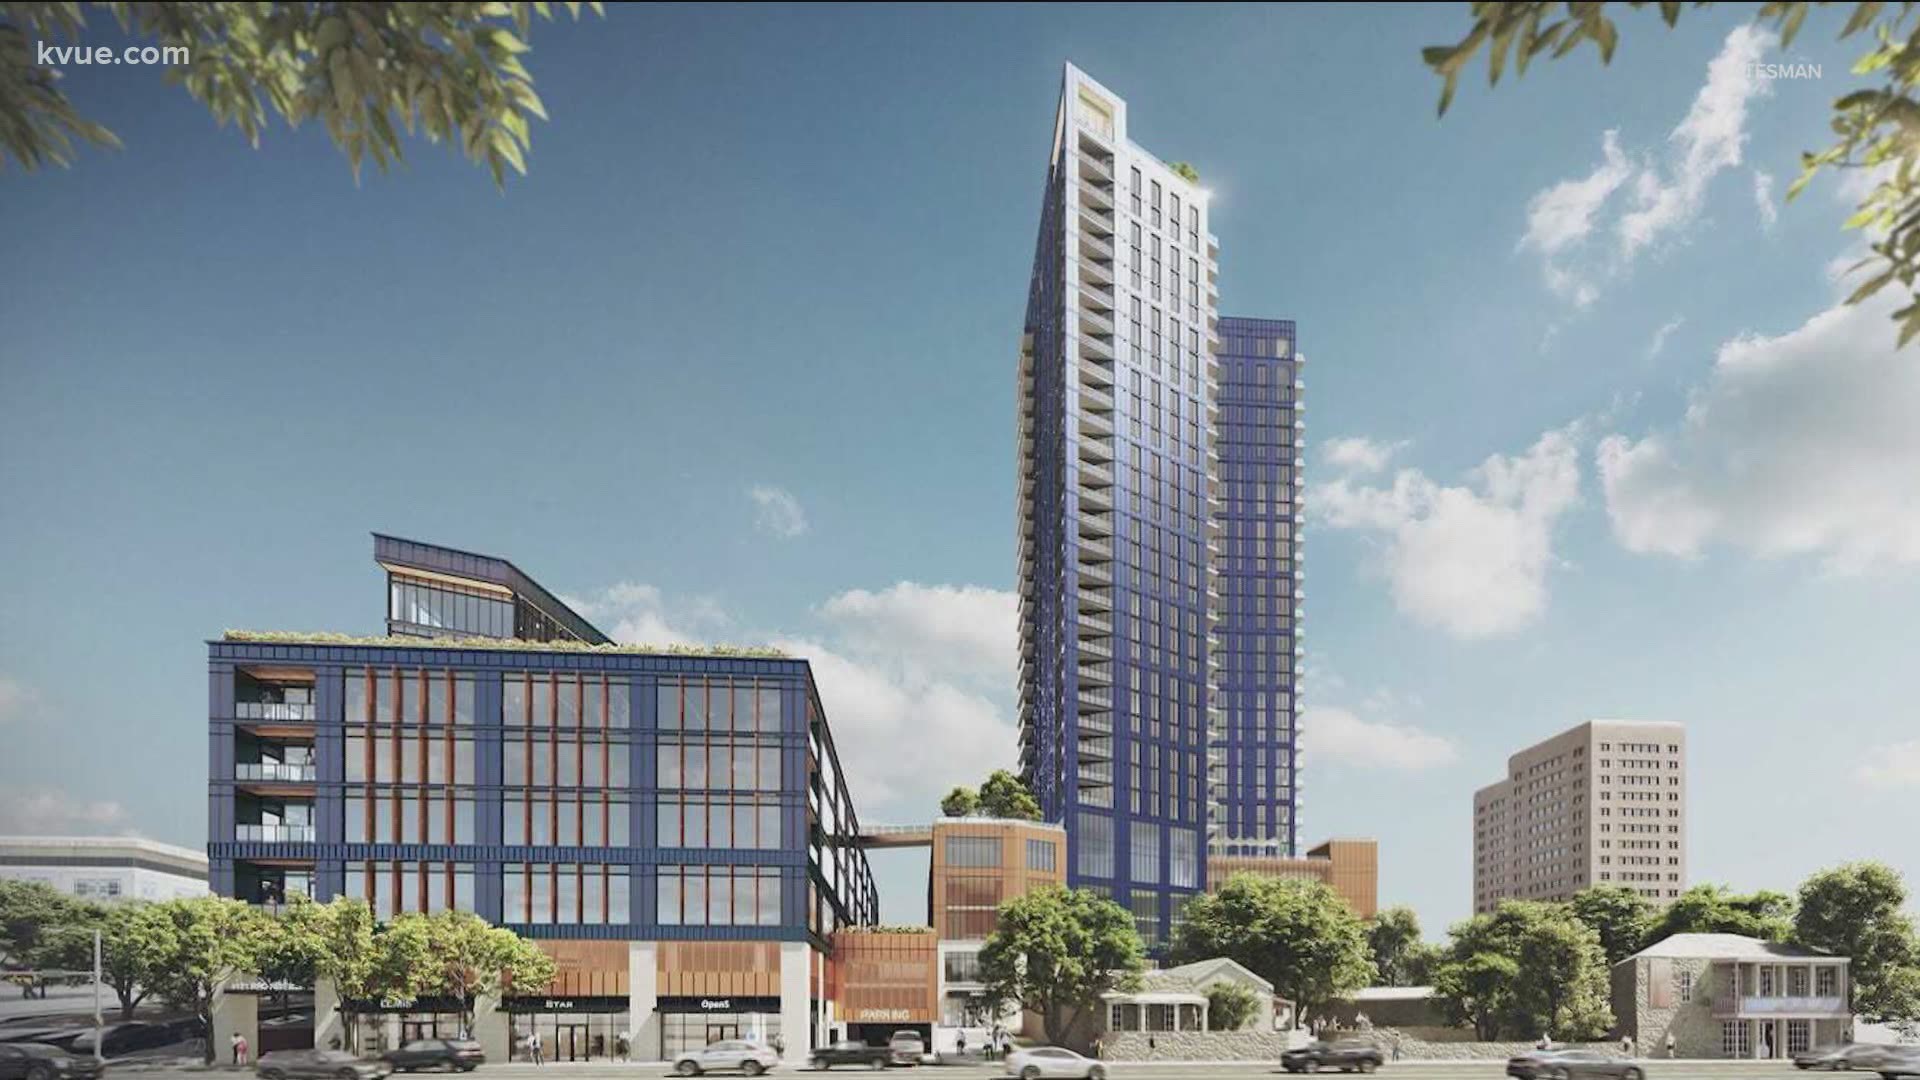 The new residential tower called "The Waller" will bring 388 units to Austin's apartment market.